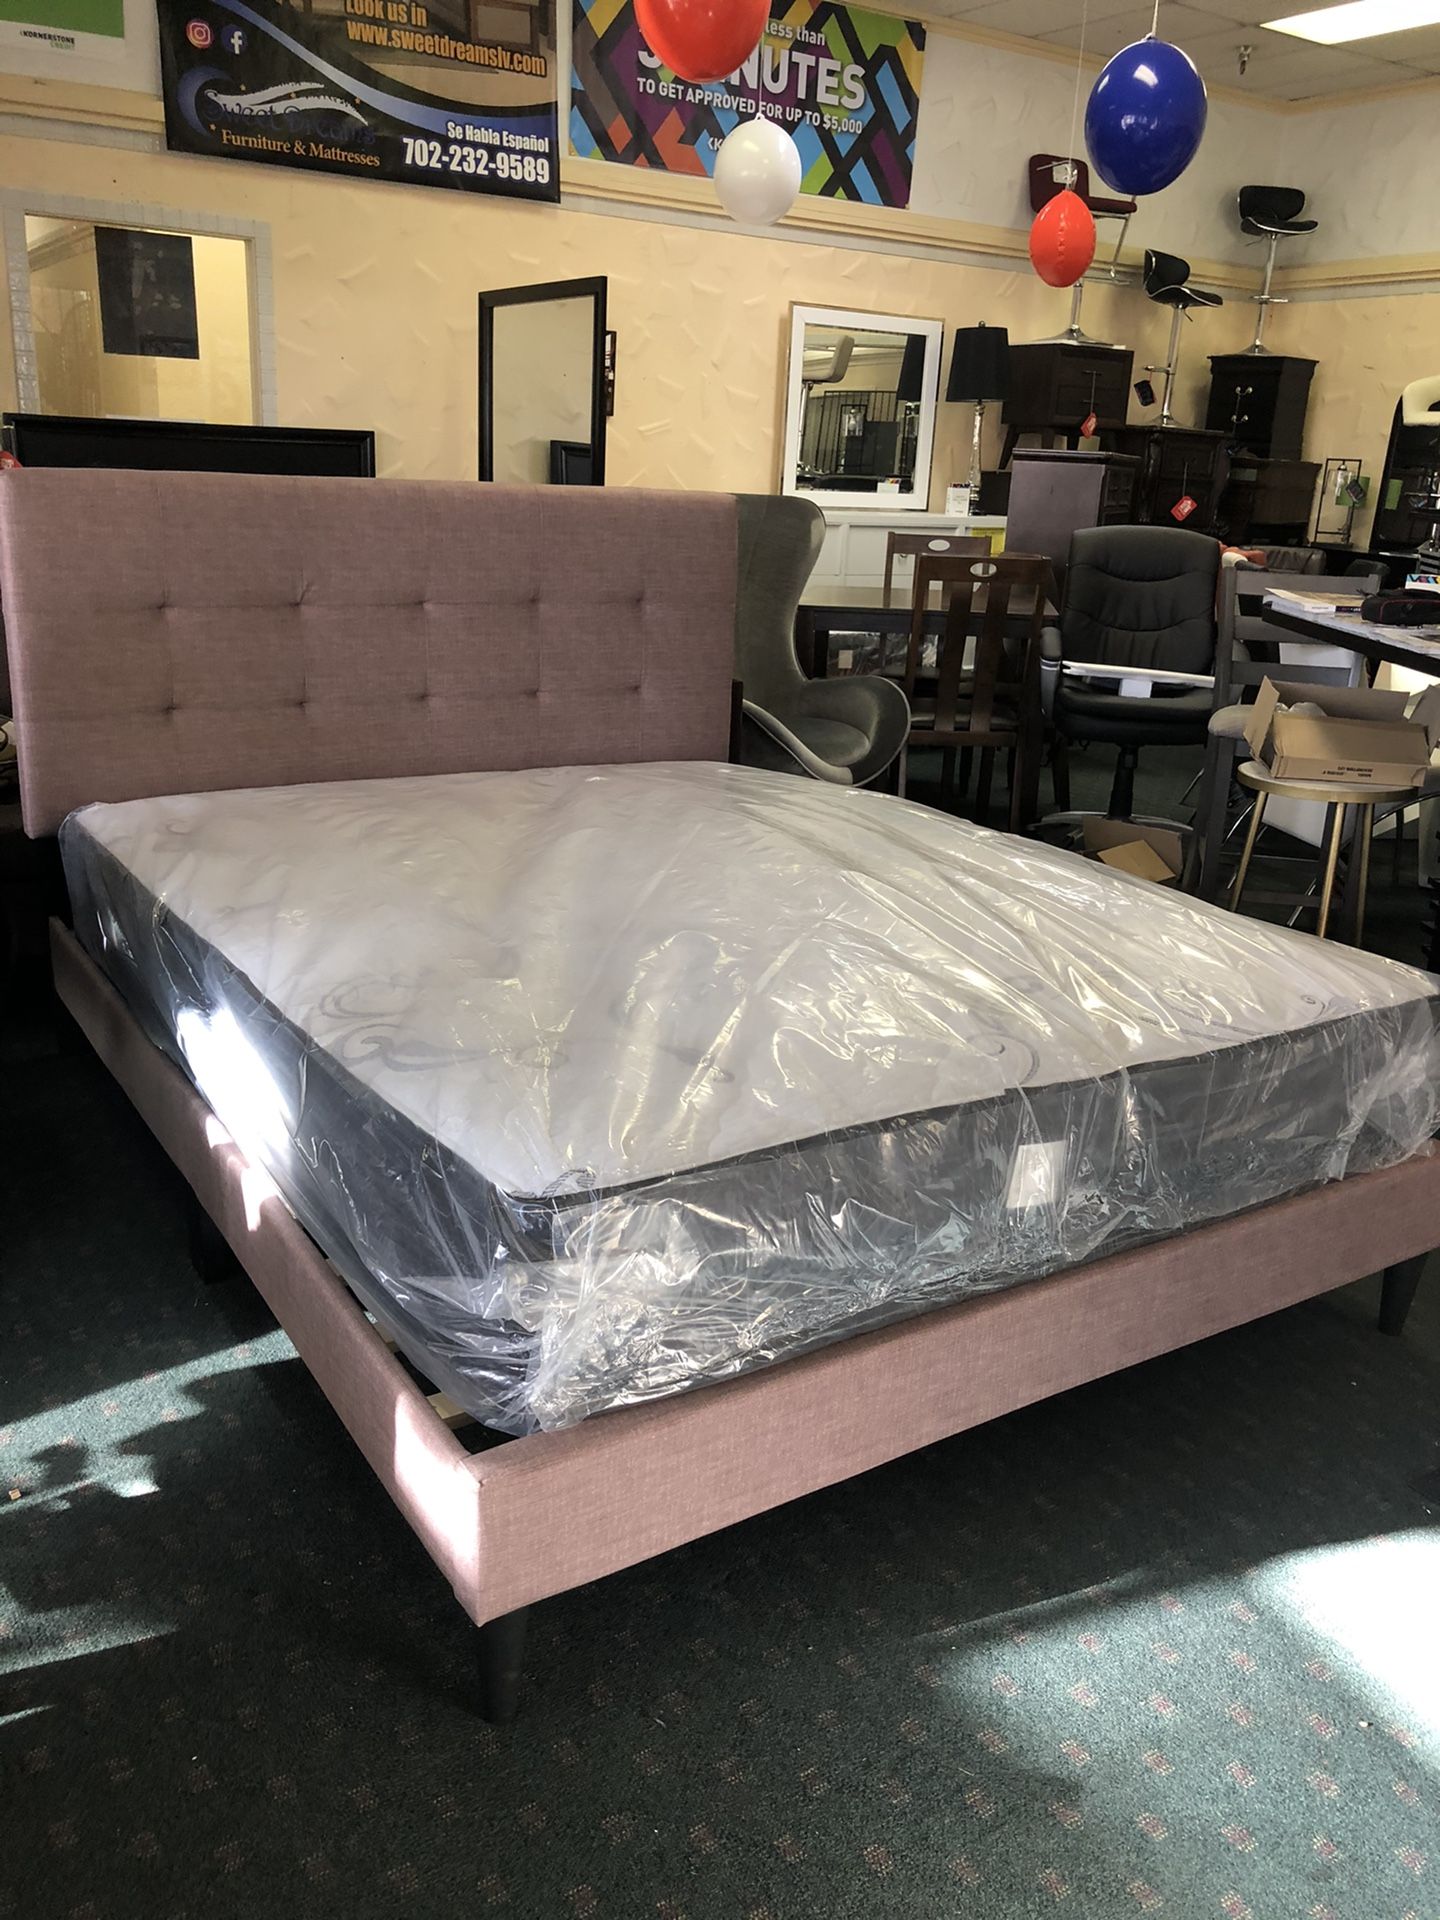 New queen size bed and mattress You must have it